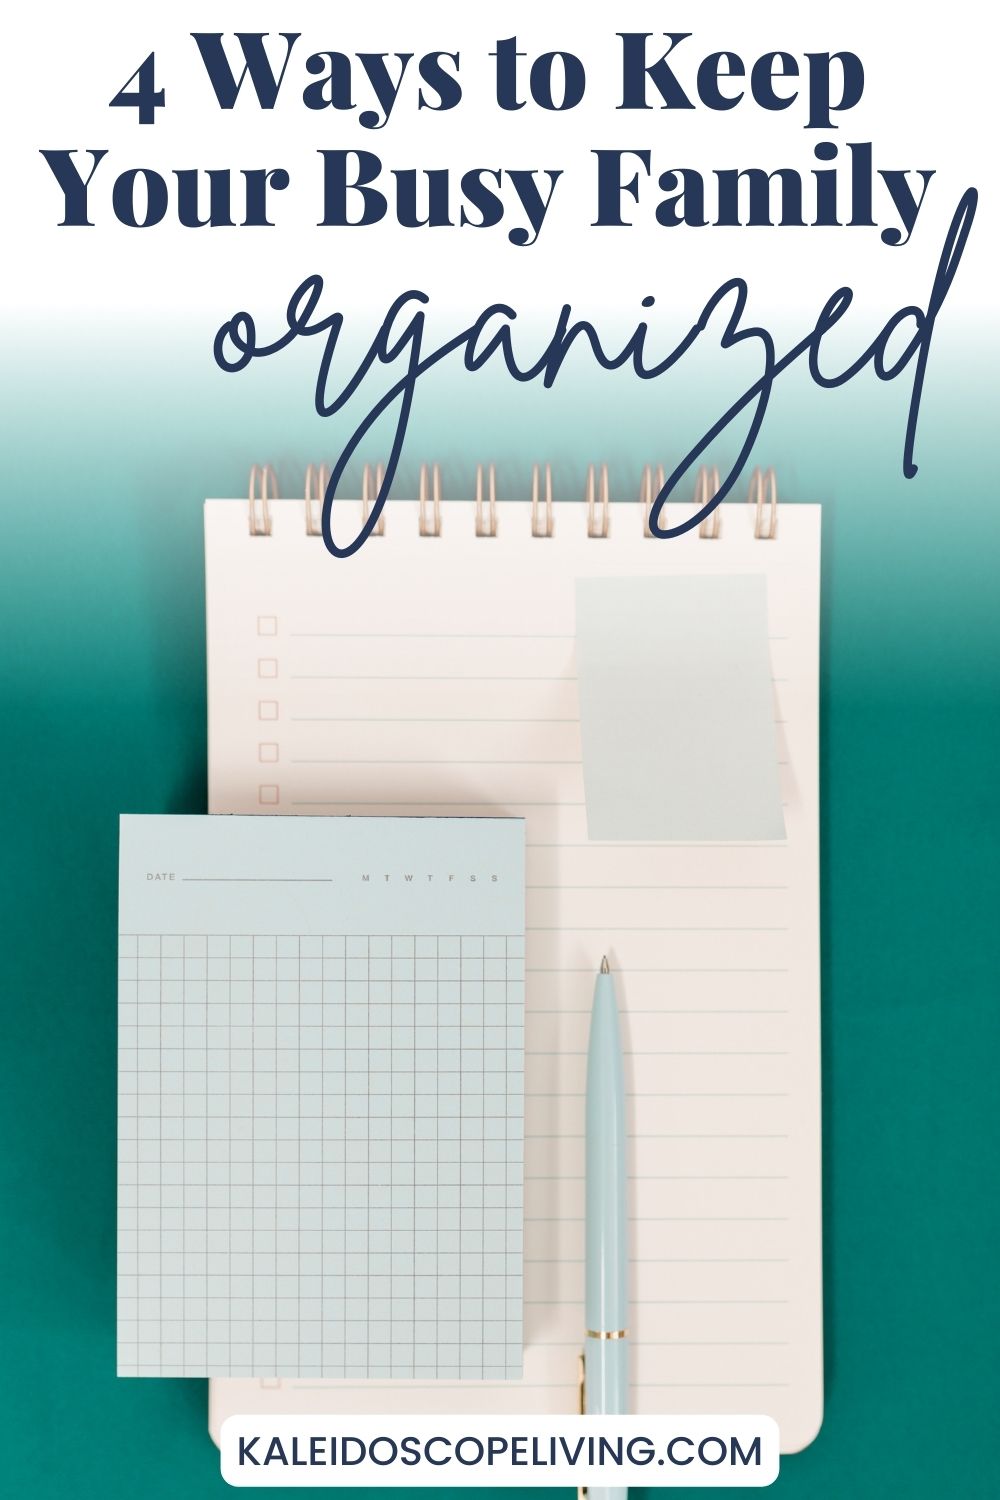 how-to-organize-your-life-with-work-kids-make-house-cool